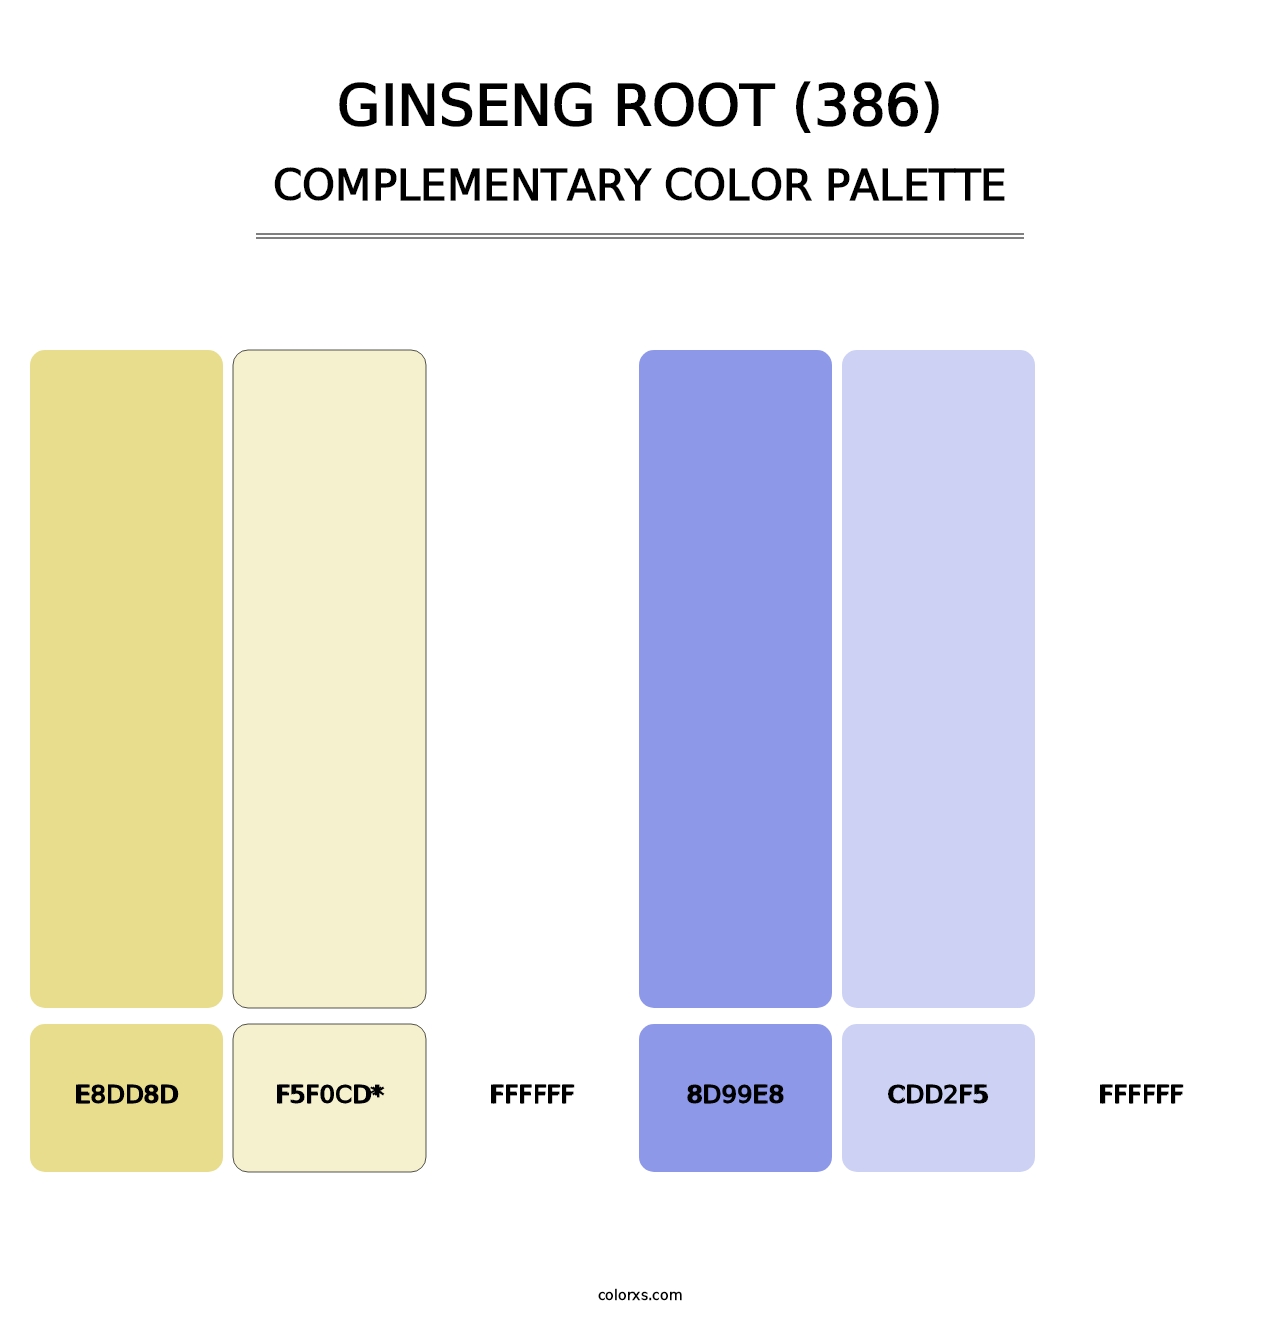 Ginseng Root (386) - Complementary Color Palette